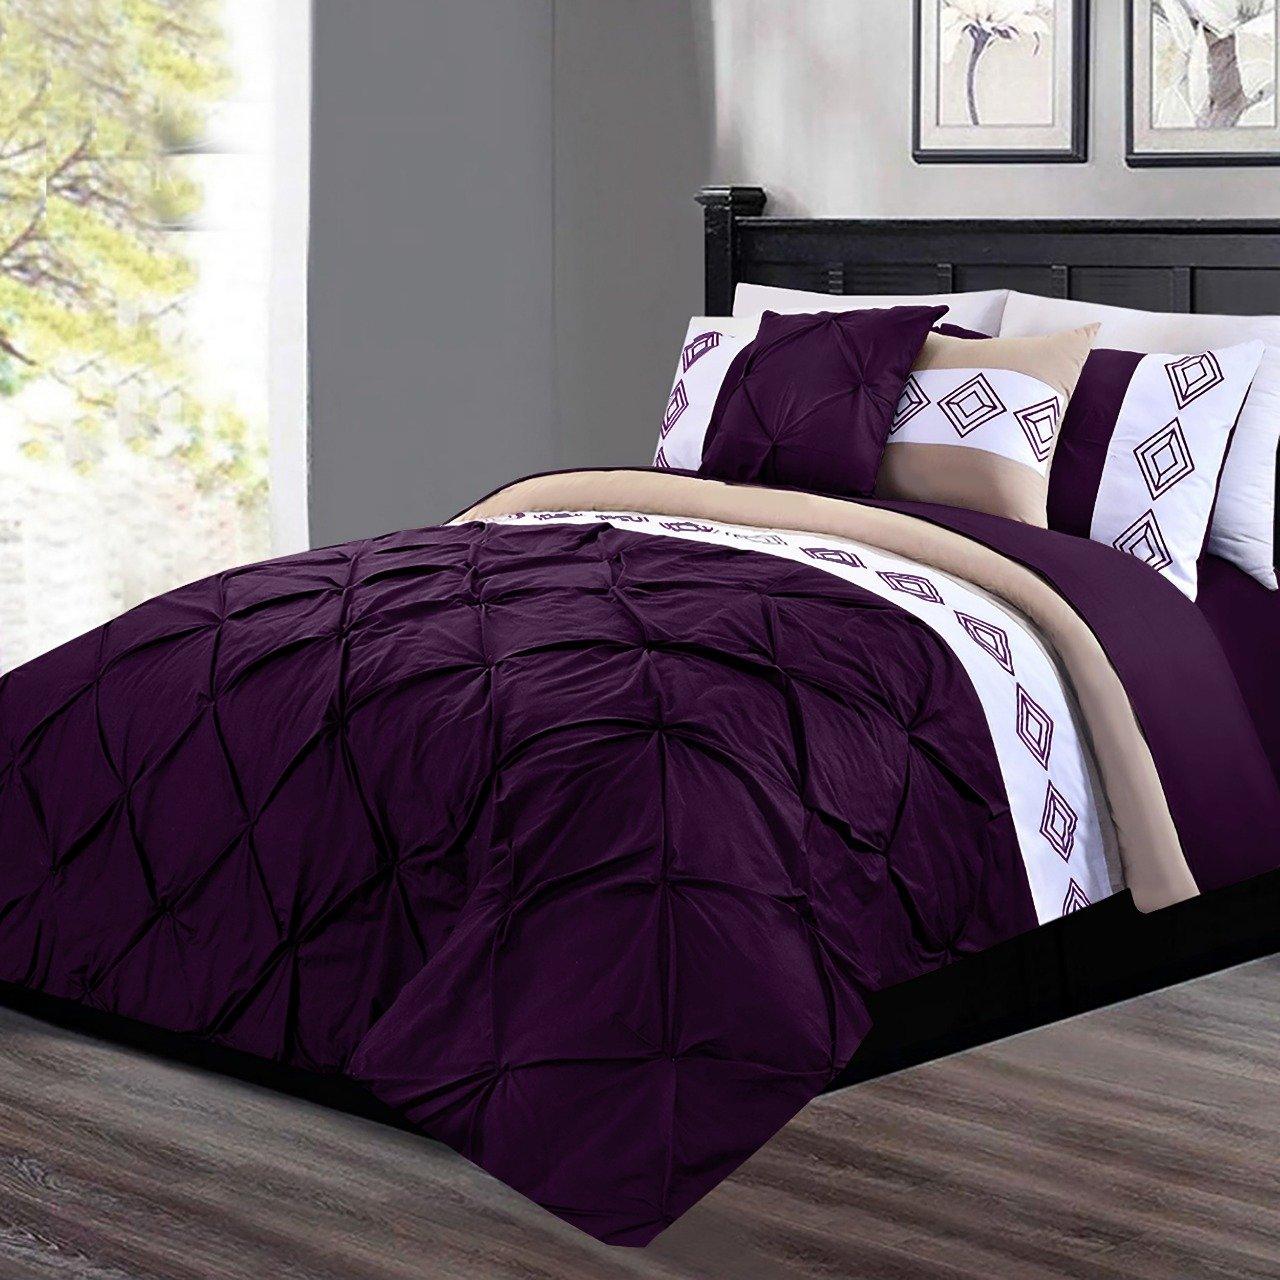 8 Pc's Luxury Embroidered Bedspread Purple With Light Filling - 92Bedding